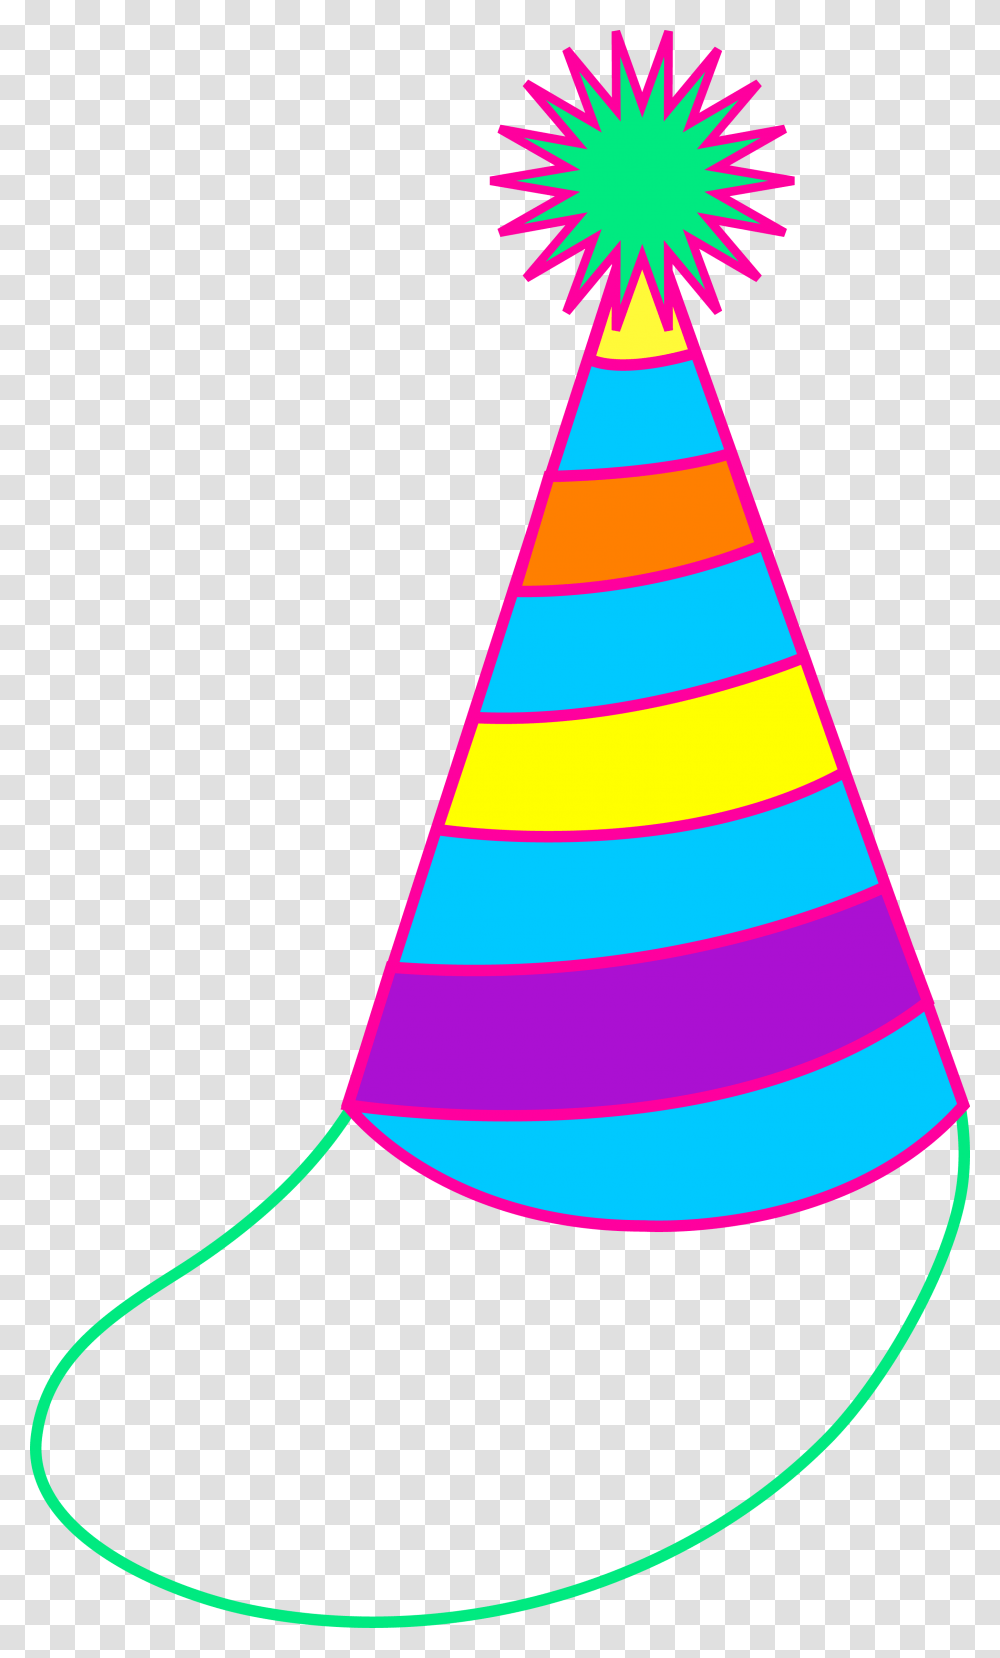 Cute Birthday Hat Cartoon, Apparel, Party Hat, Cone Transparent Png